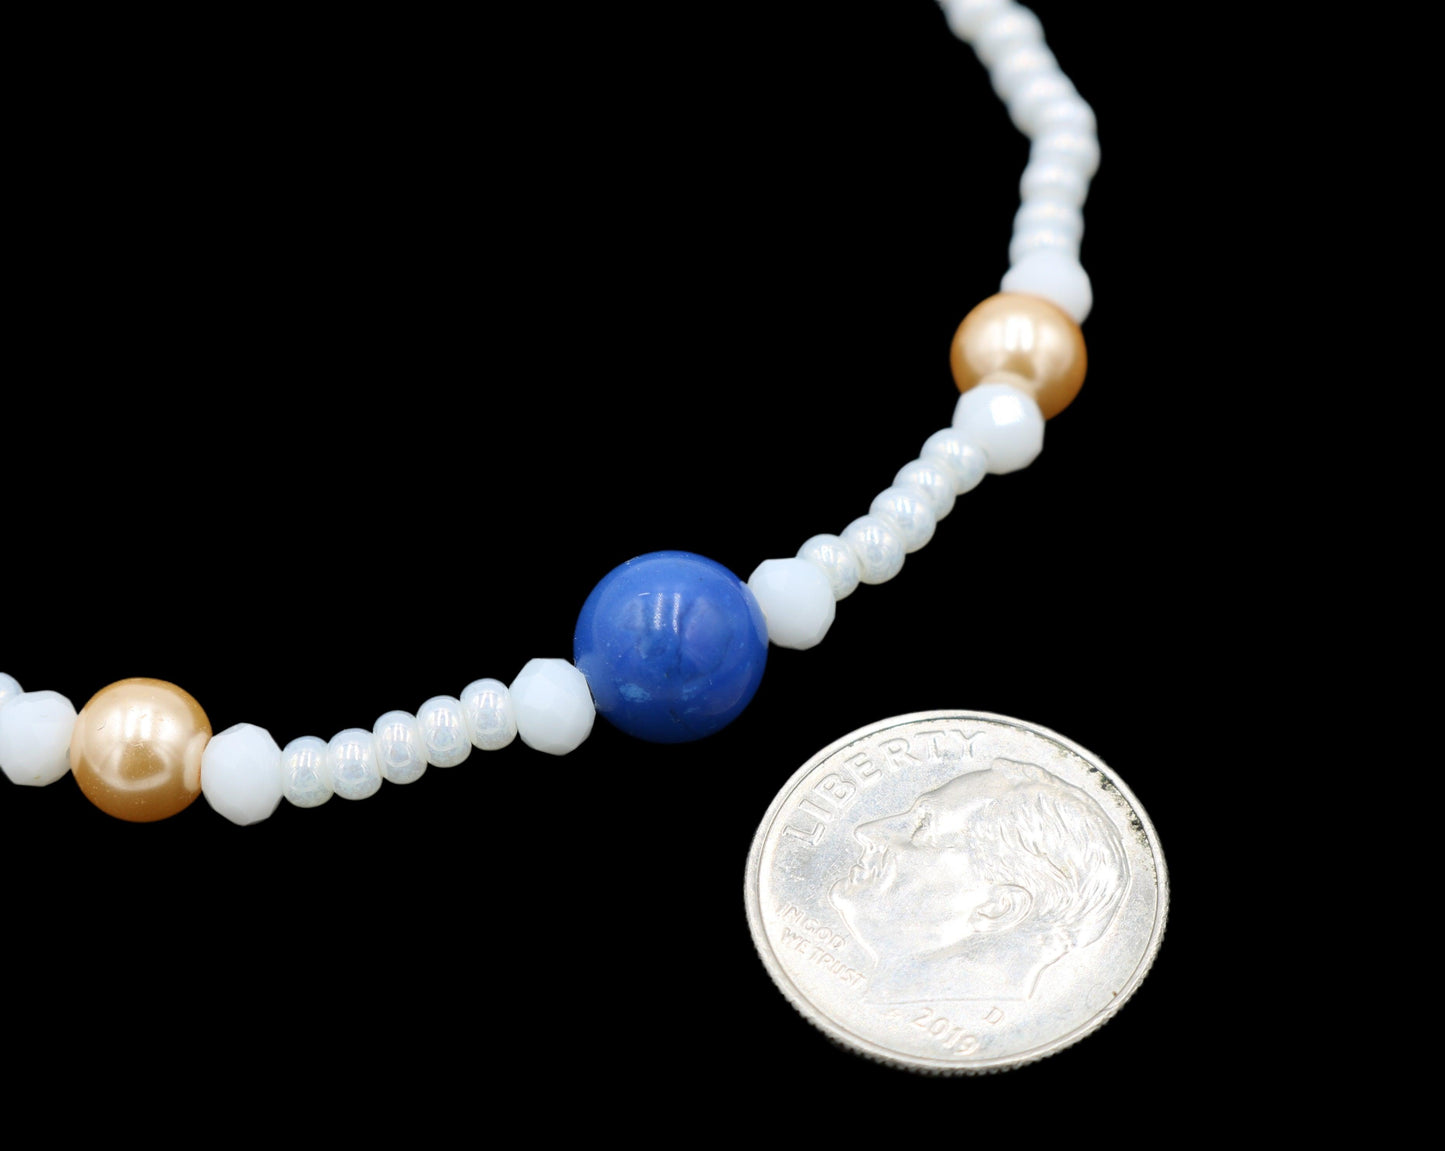 White Me Down and Pearl Me Blue Iridescent Pearl White Rose Gold Glass Pearls and Blue  Fun Boho Stretch Stack Bracelet Women’s Gift 2022 - Monkeysmojo